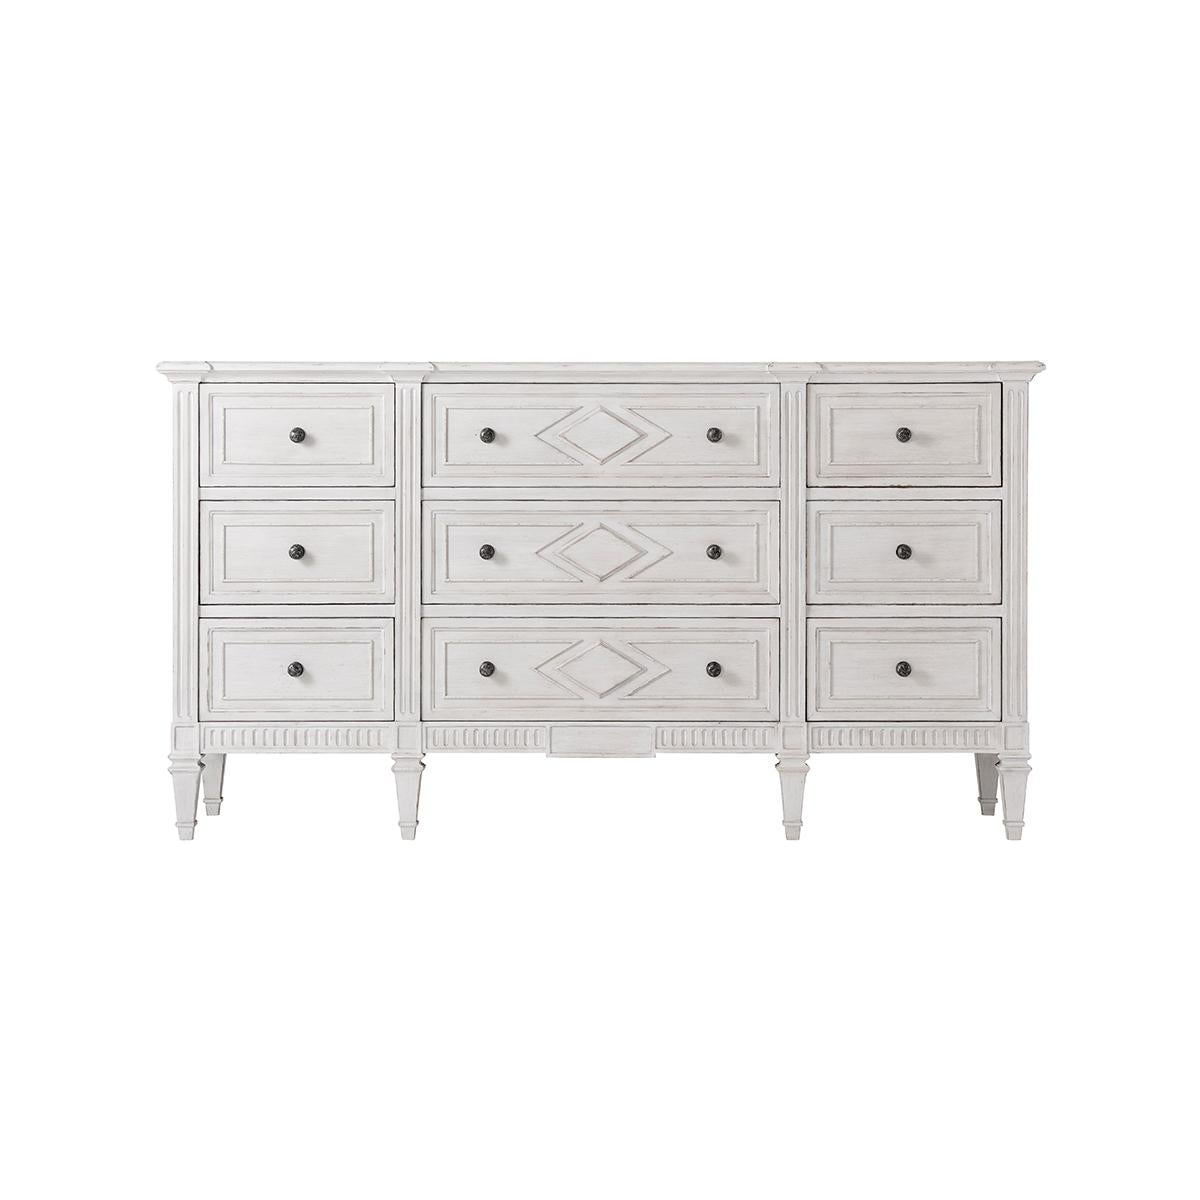 In a painted antique finish with a molded edge rectangular top, nine paneled drawers with lozenge detailing motifs, antiqued pewter handles, with a fluted base and raised on square tapered legs. In the French Directoire style.

Dimensions: 70